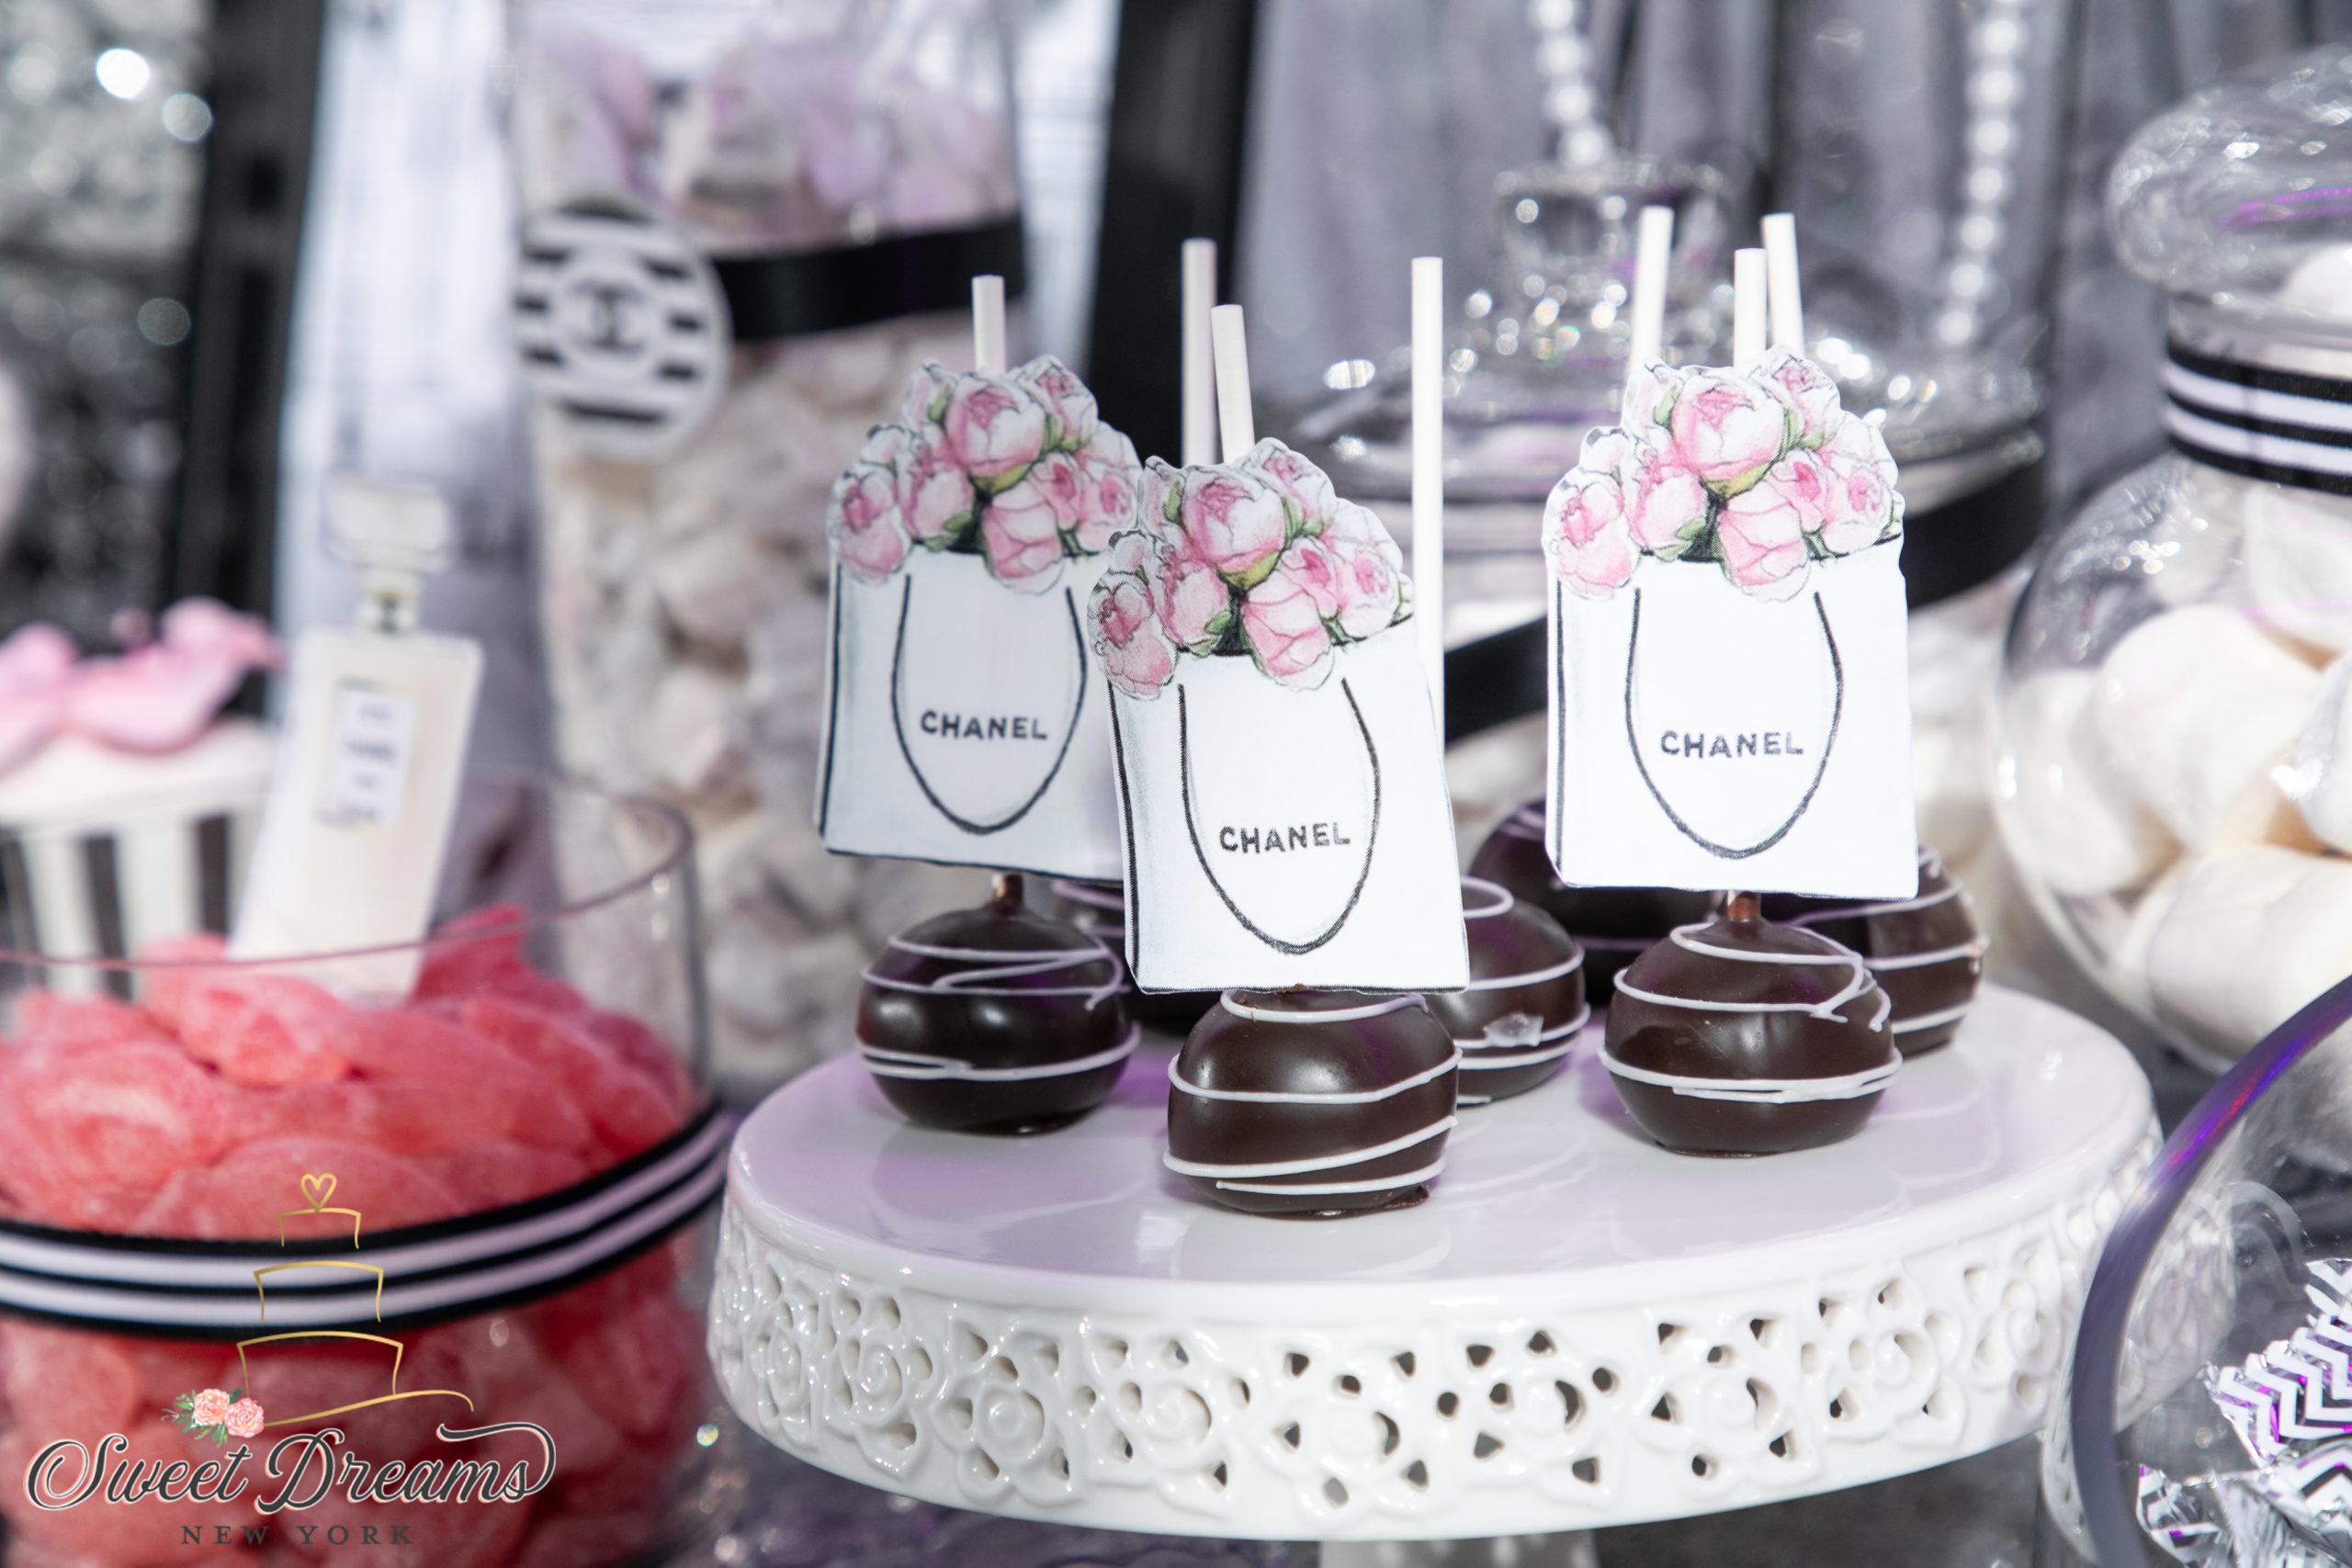 NYC Dessert Table Chanel Bridal Shower Cake Pops Sweet Table ideas Long Island NY